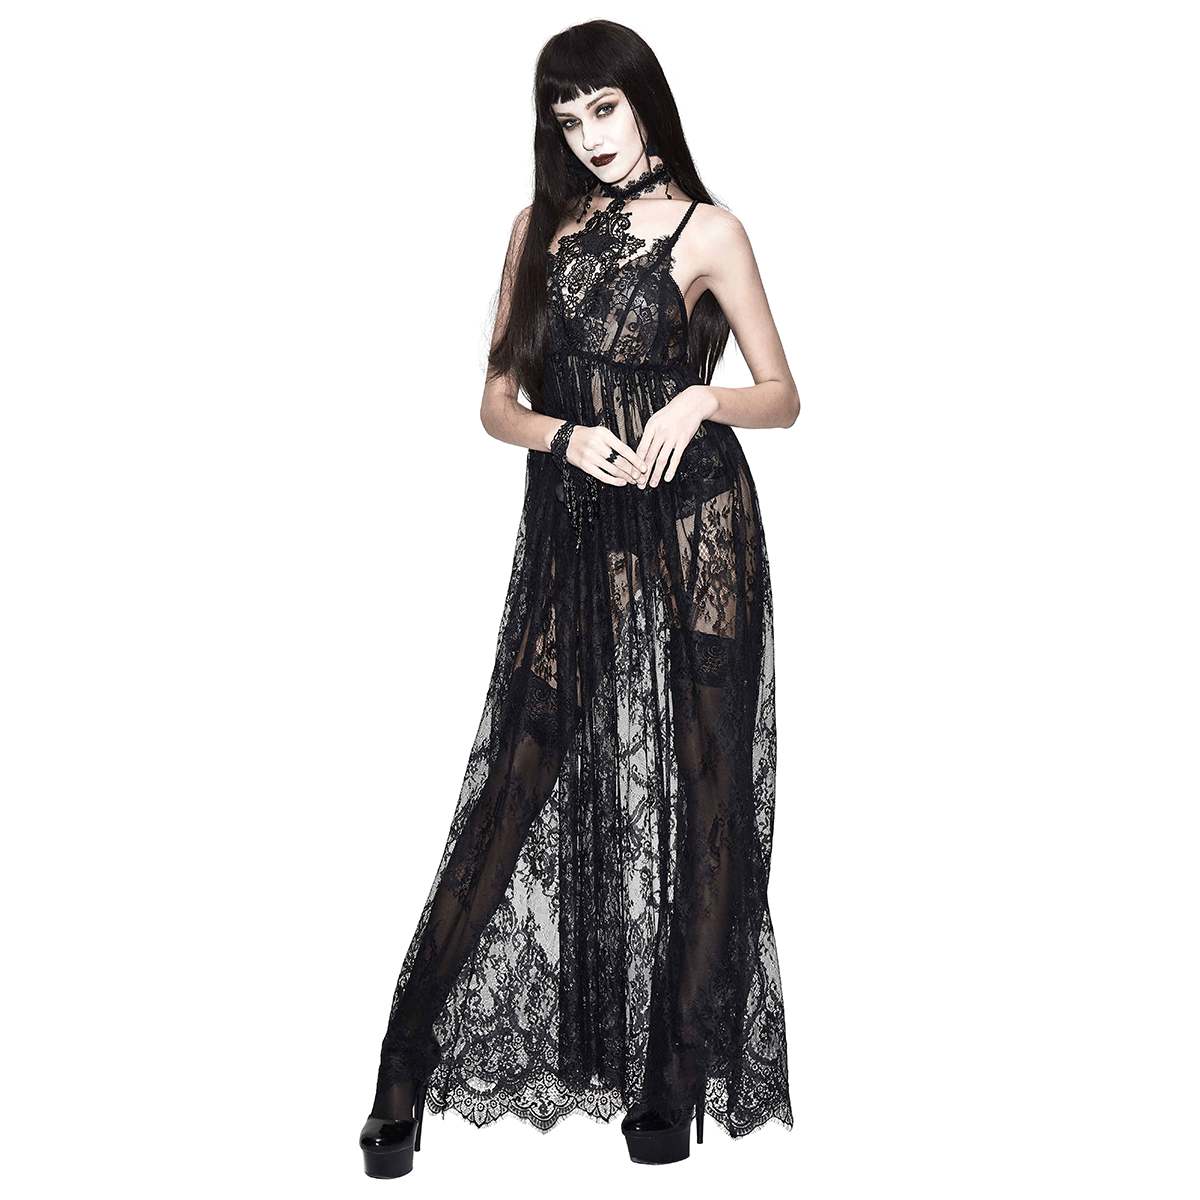 Sexy Long Transparent Lace Dress / Romantic Black Dresses With Lace Chocker - HARD'N'HEAVY